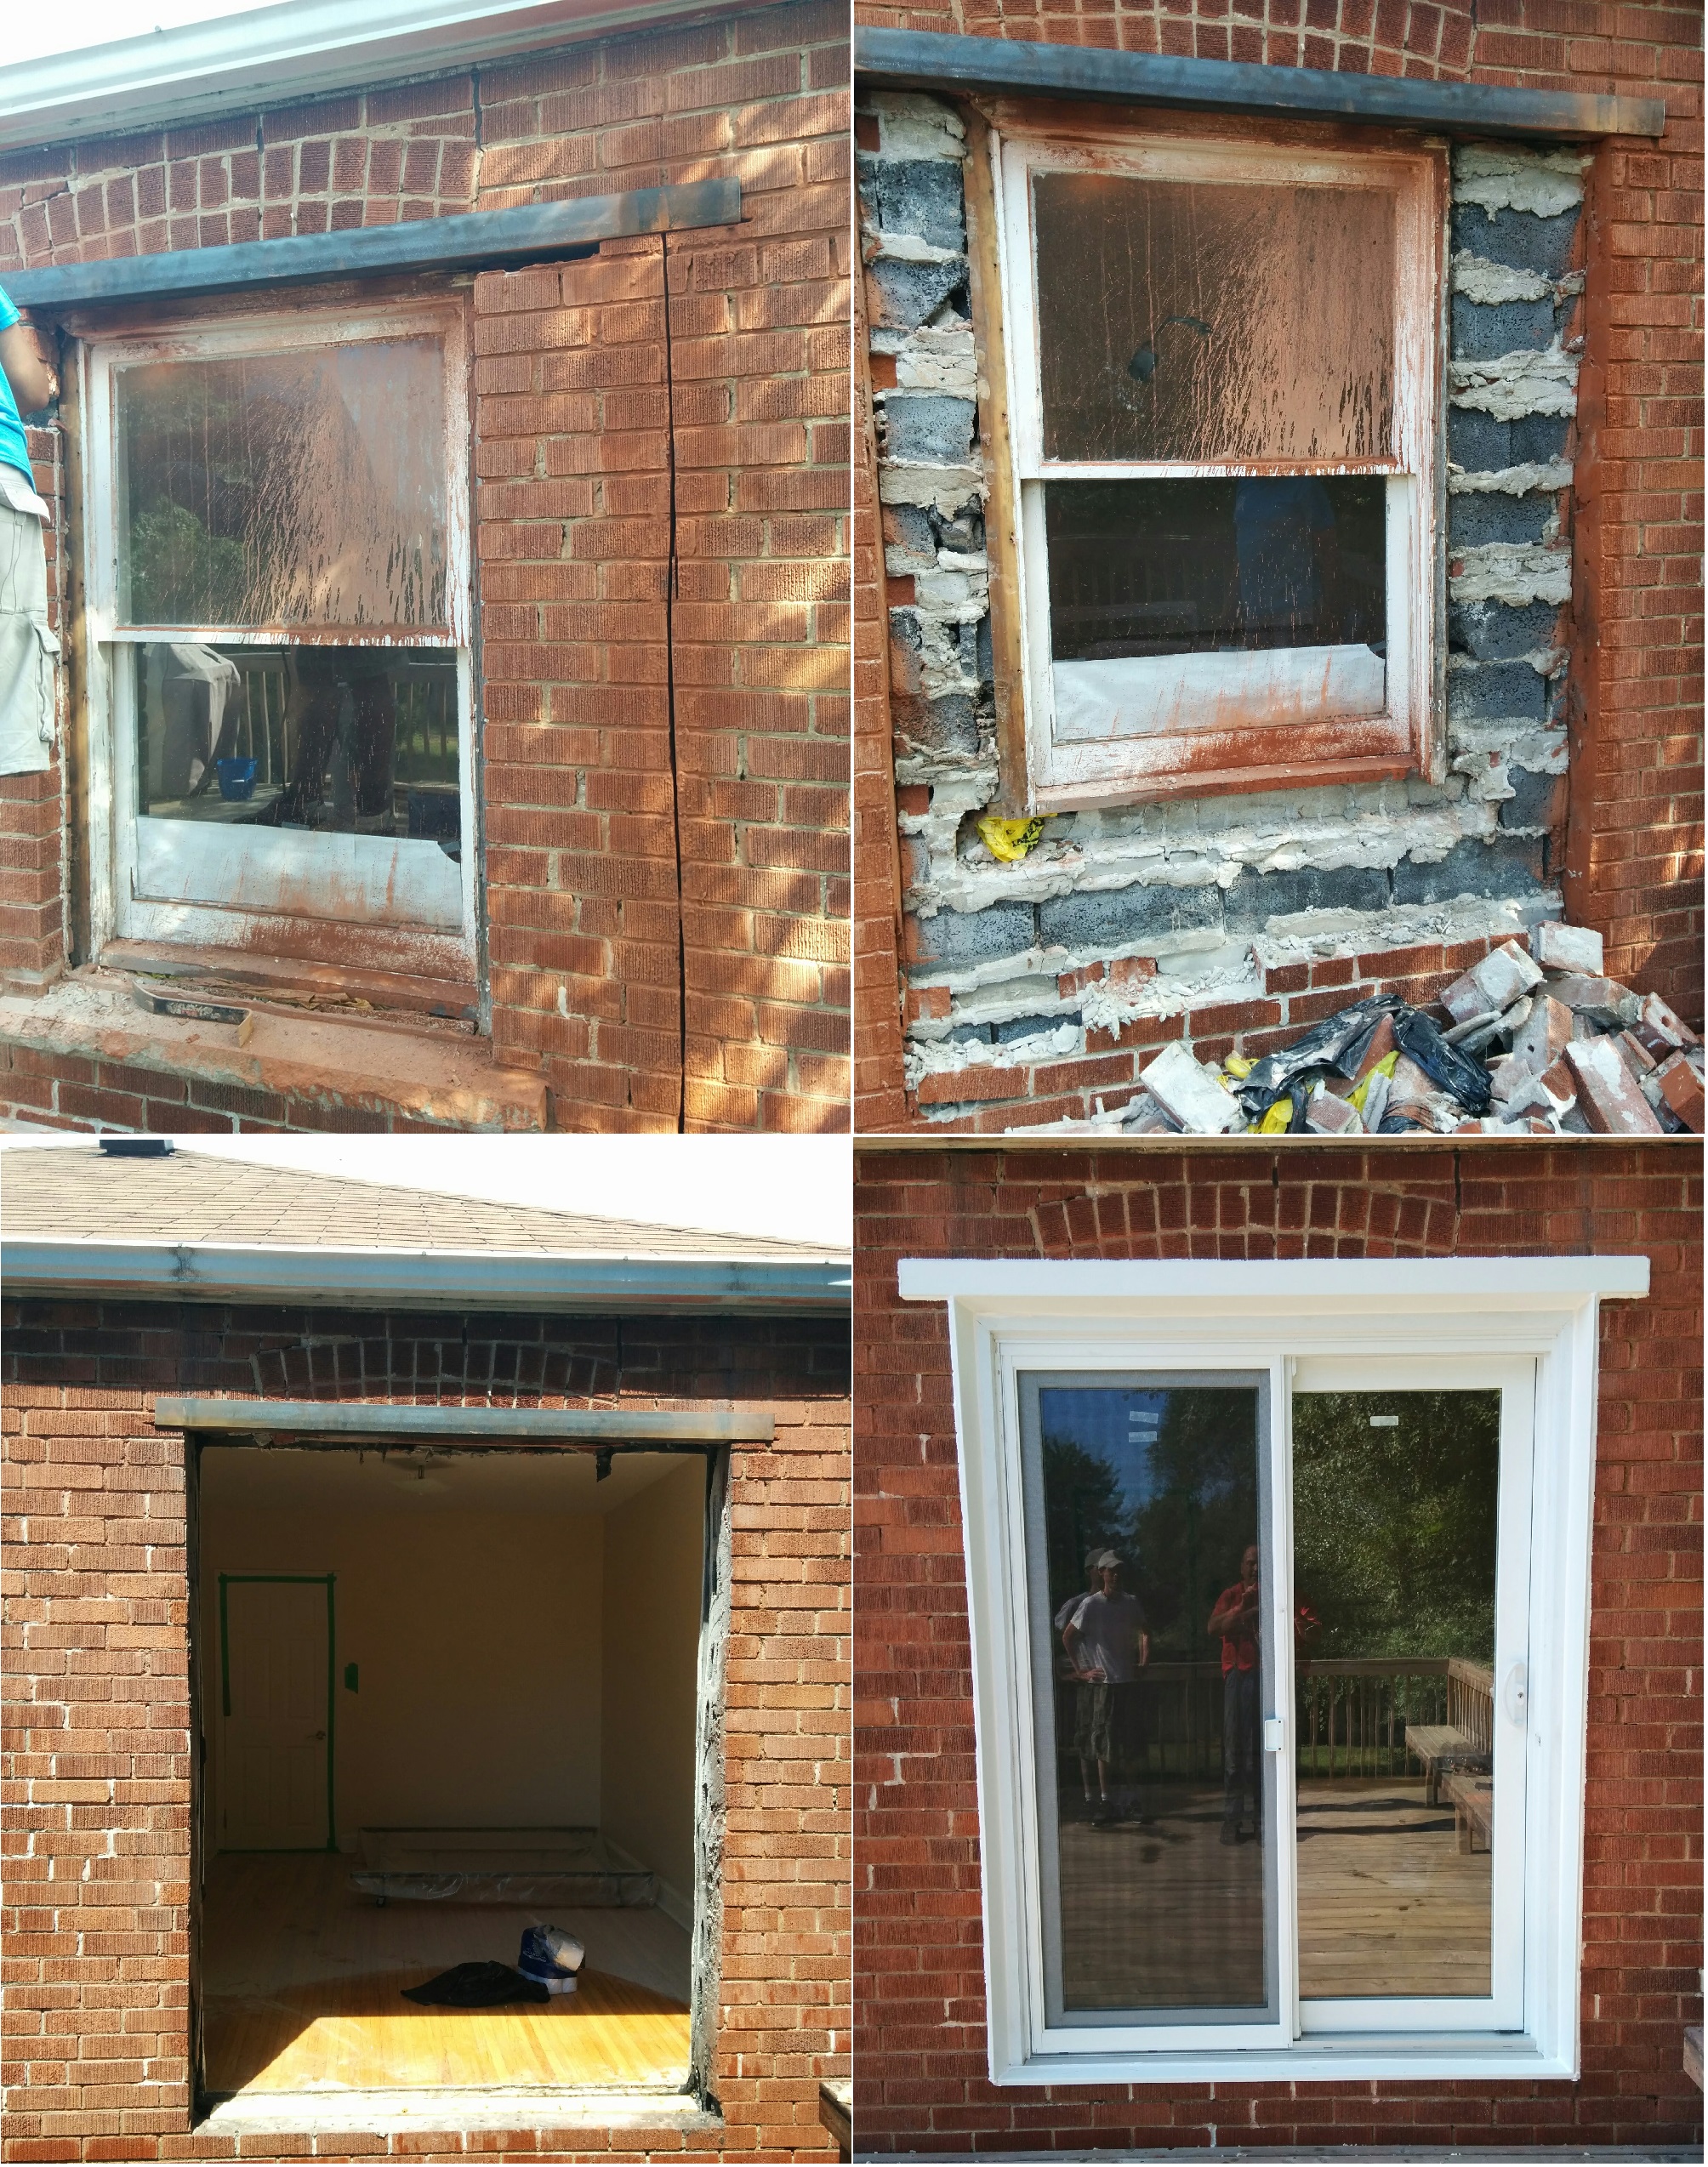 Cut our brick and block. Install a metall Lintel to create a new doorway in an existing brick and block wall. Double brick. Sliding door installation. Aluminum flashing